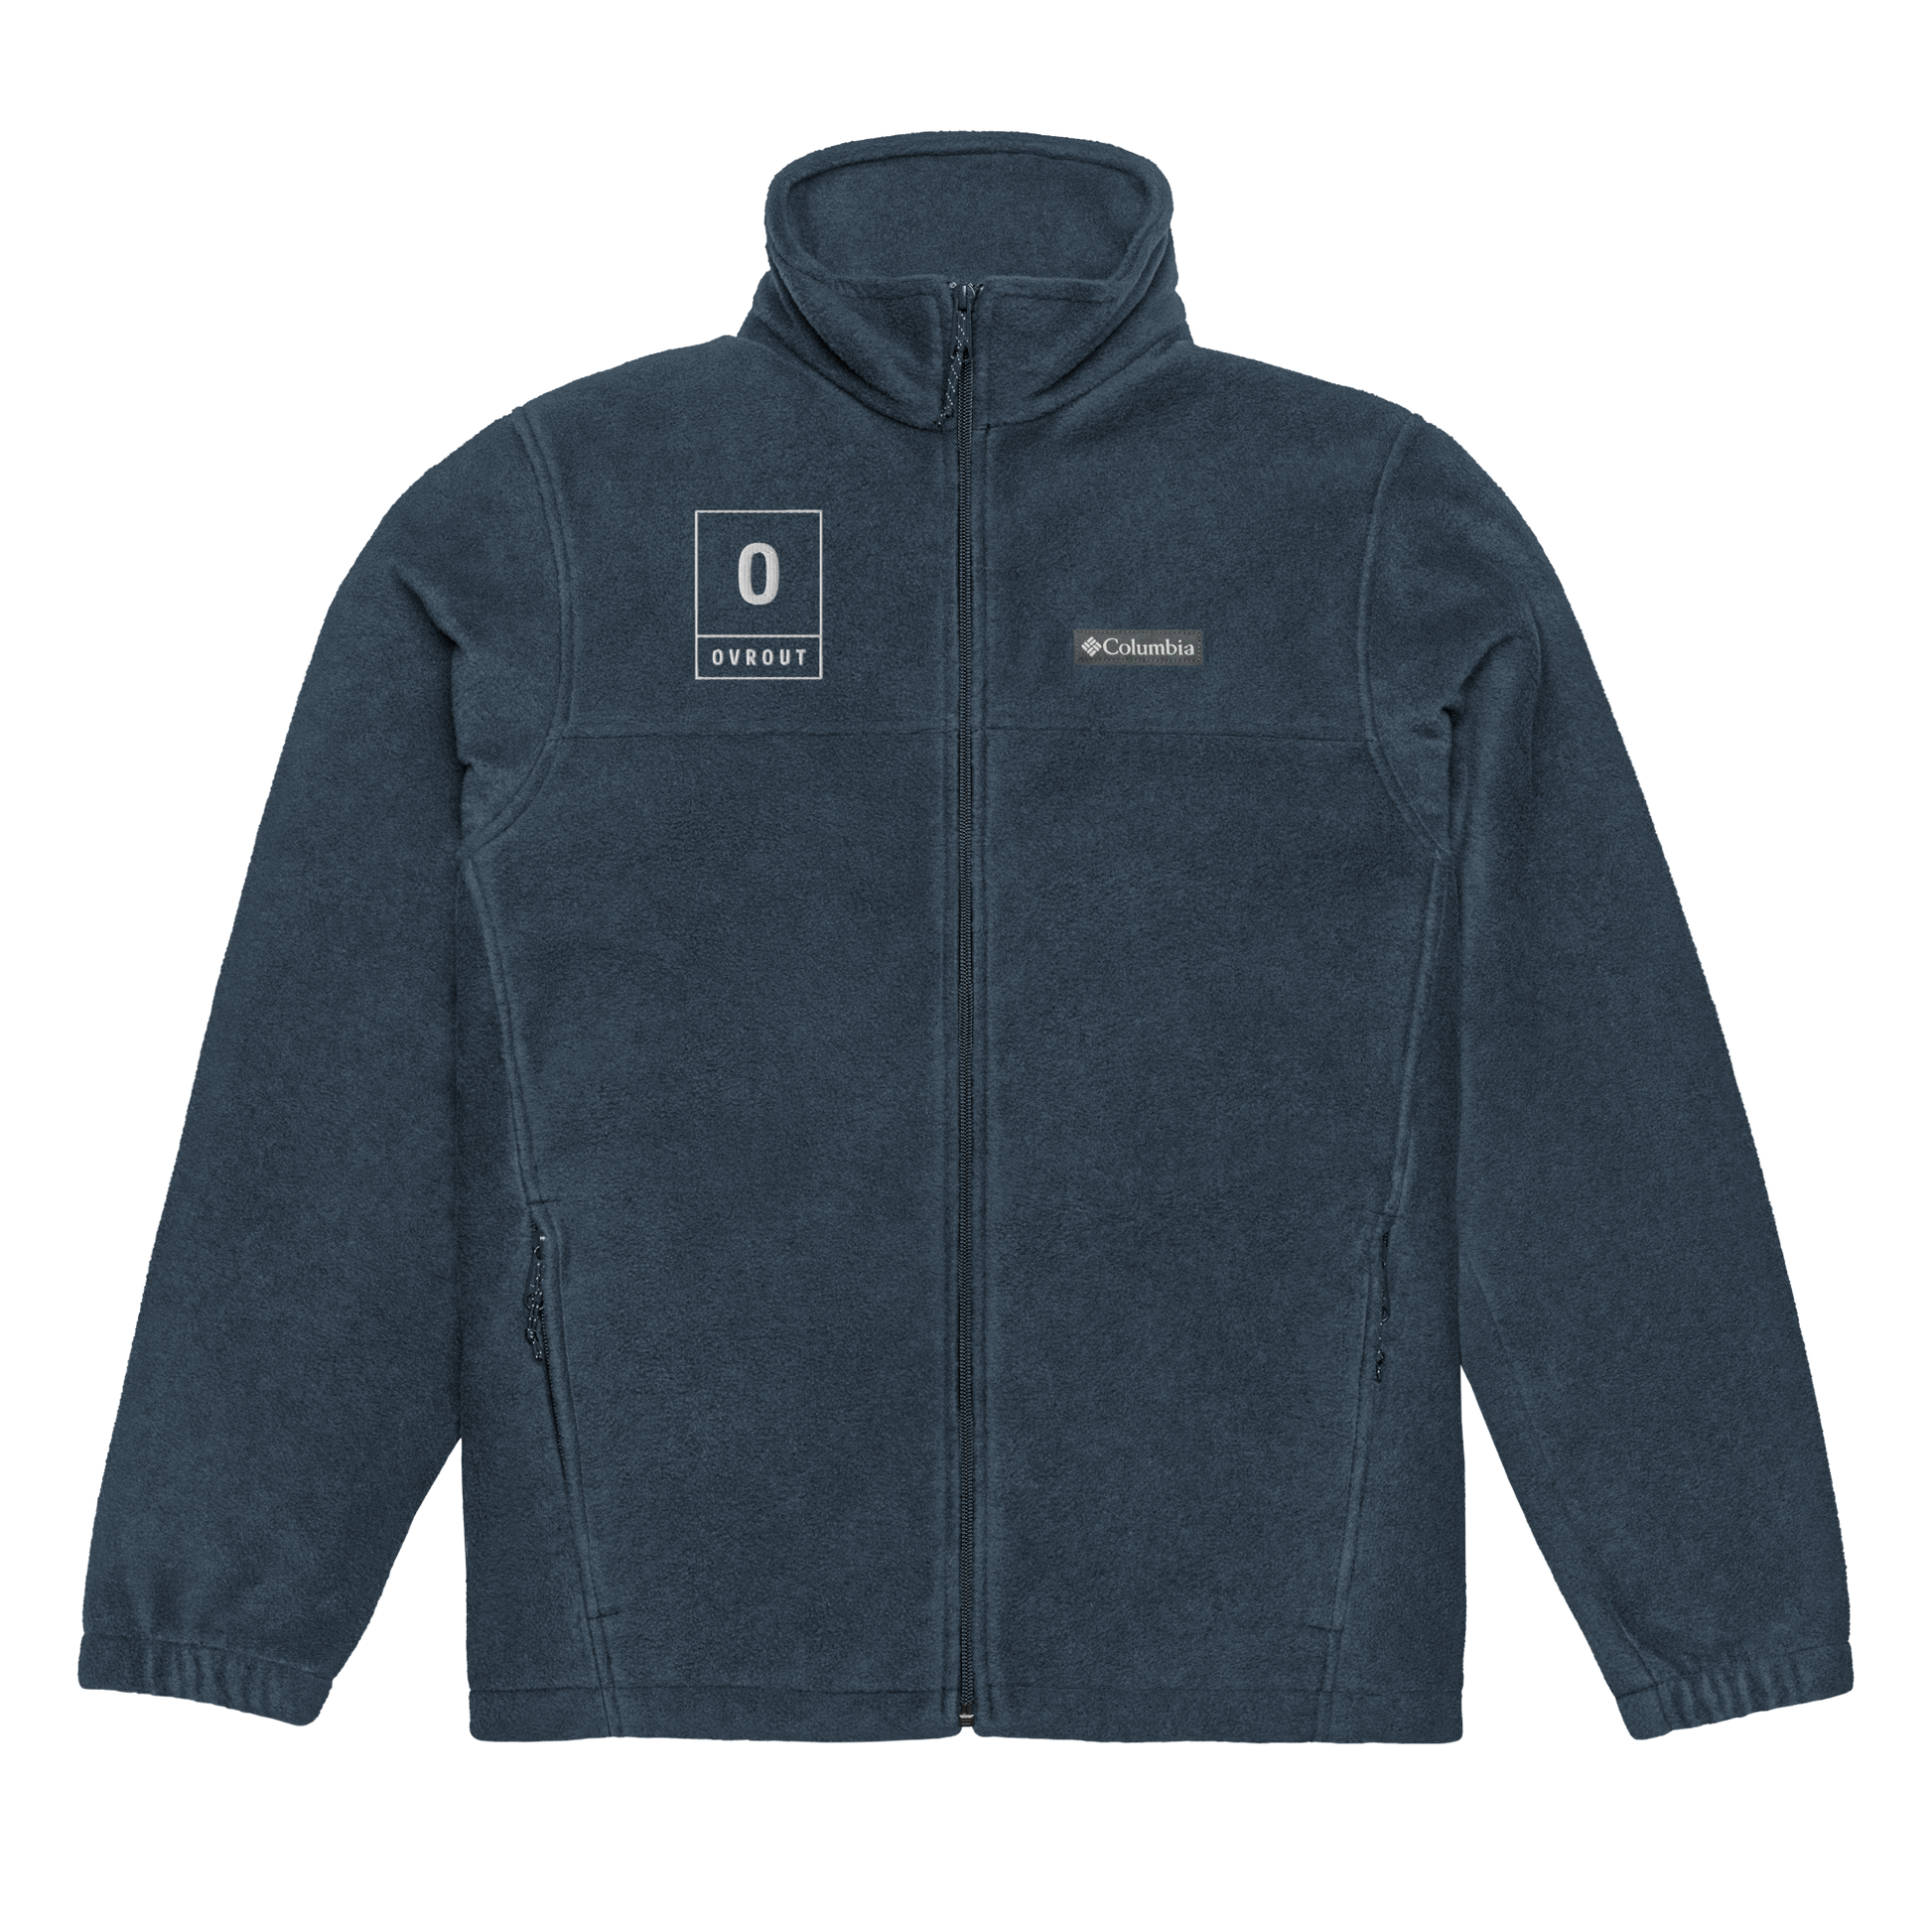 Embroidered Unisex Columbia fleece jacket - OVR & OUT